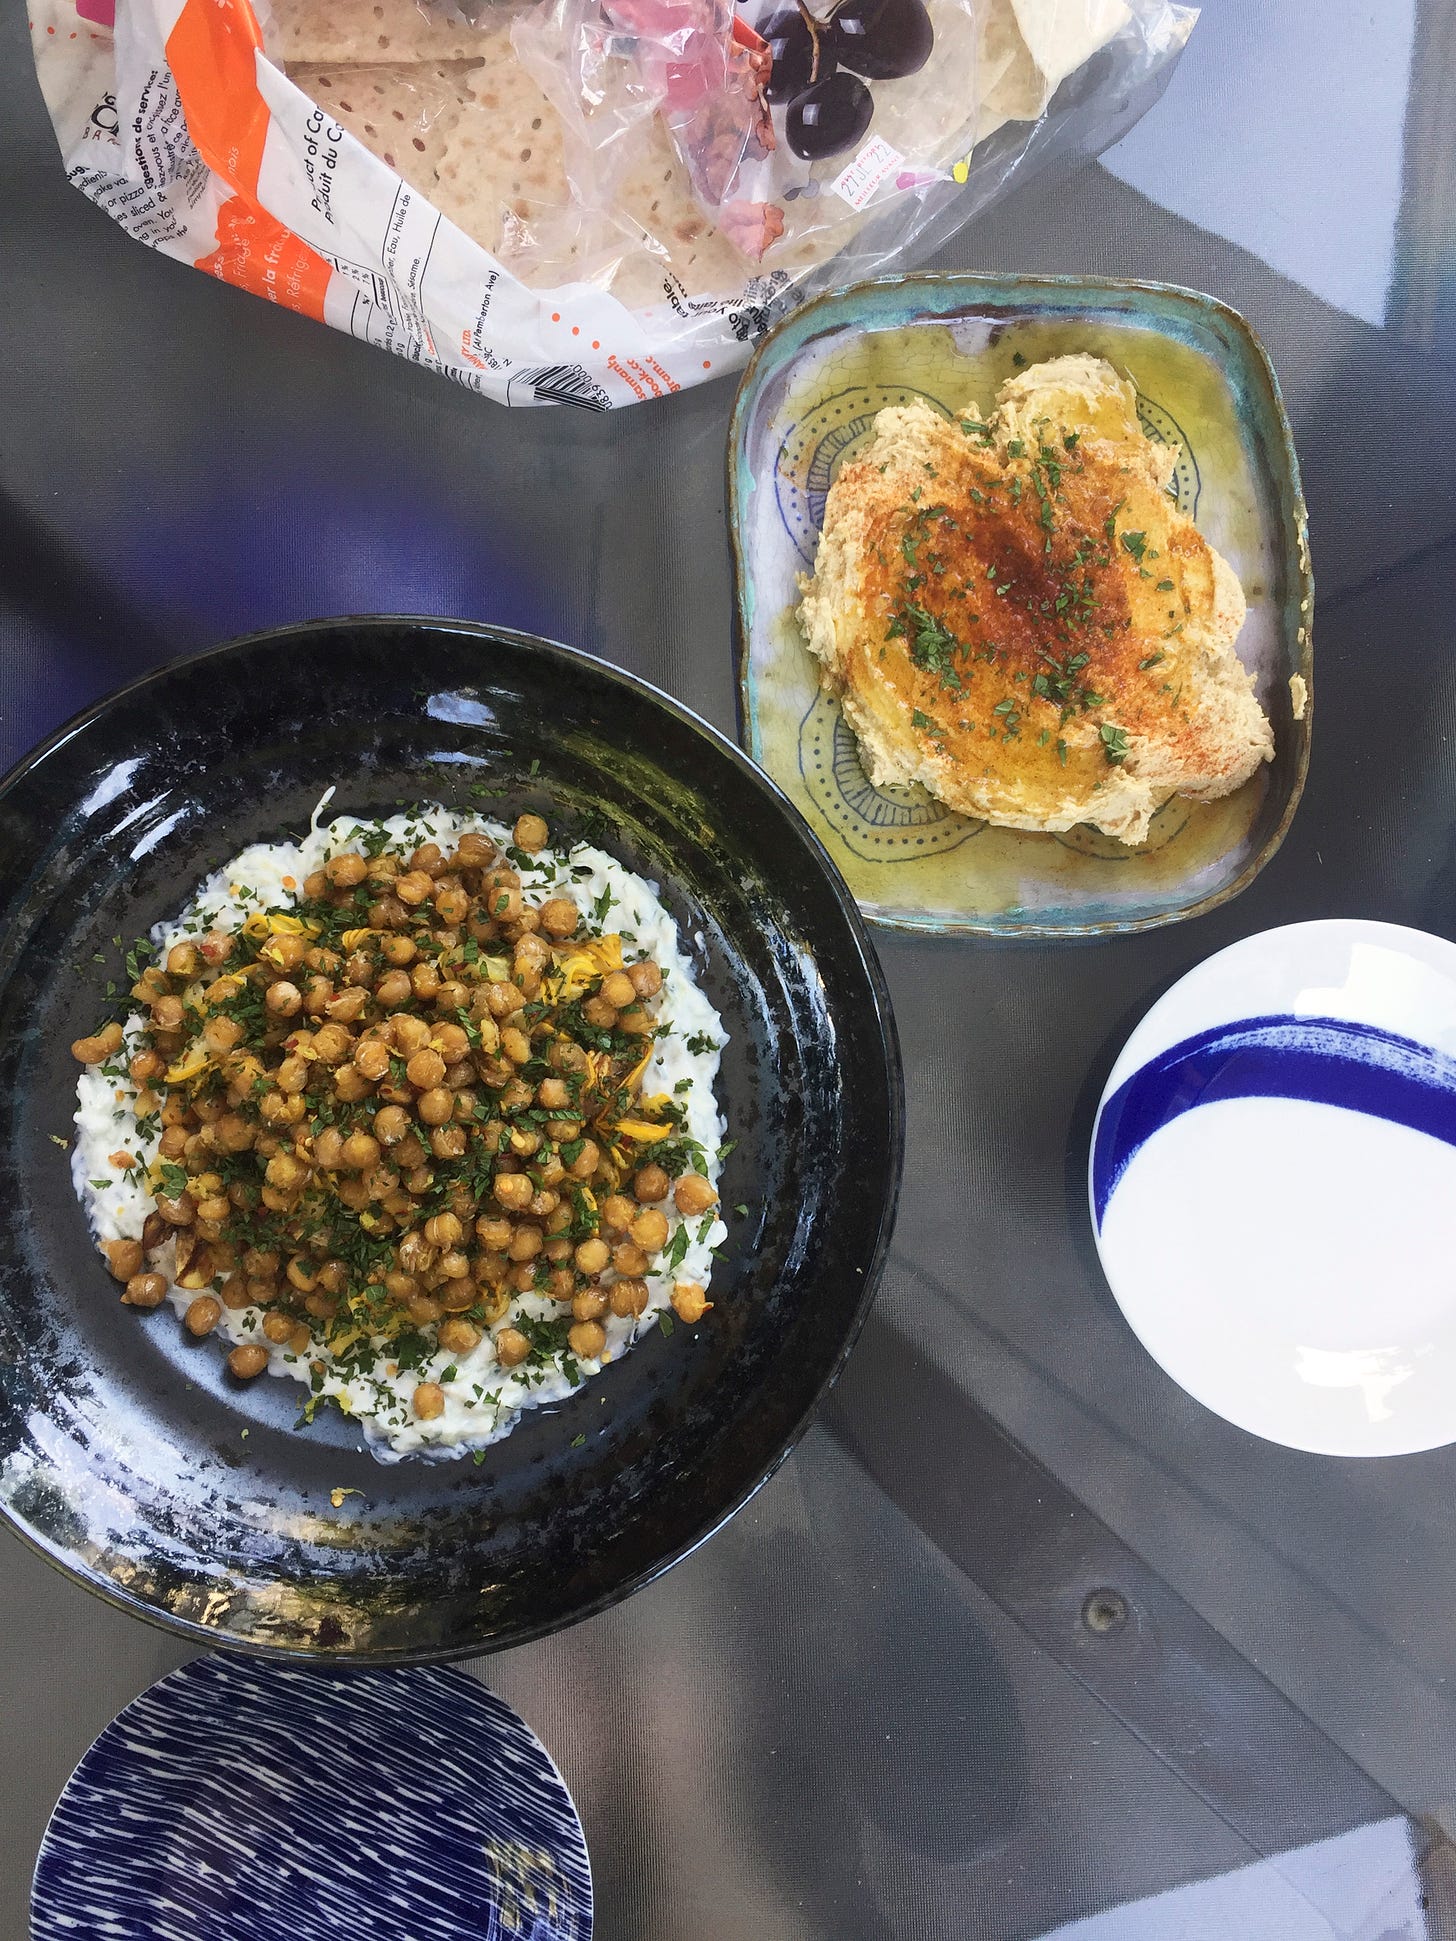 A shallow black dish full of the tzatziki, zucchini, and chickpeas, with herbs and lemon zest on the top. Another smaller, shallow blue dish has a smear of hummus in the centre, coated in olive oil and spices and chopped herbs. At the top of the frame is a bag of taftoon, and two small plates are at the lower edge of the frame.